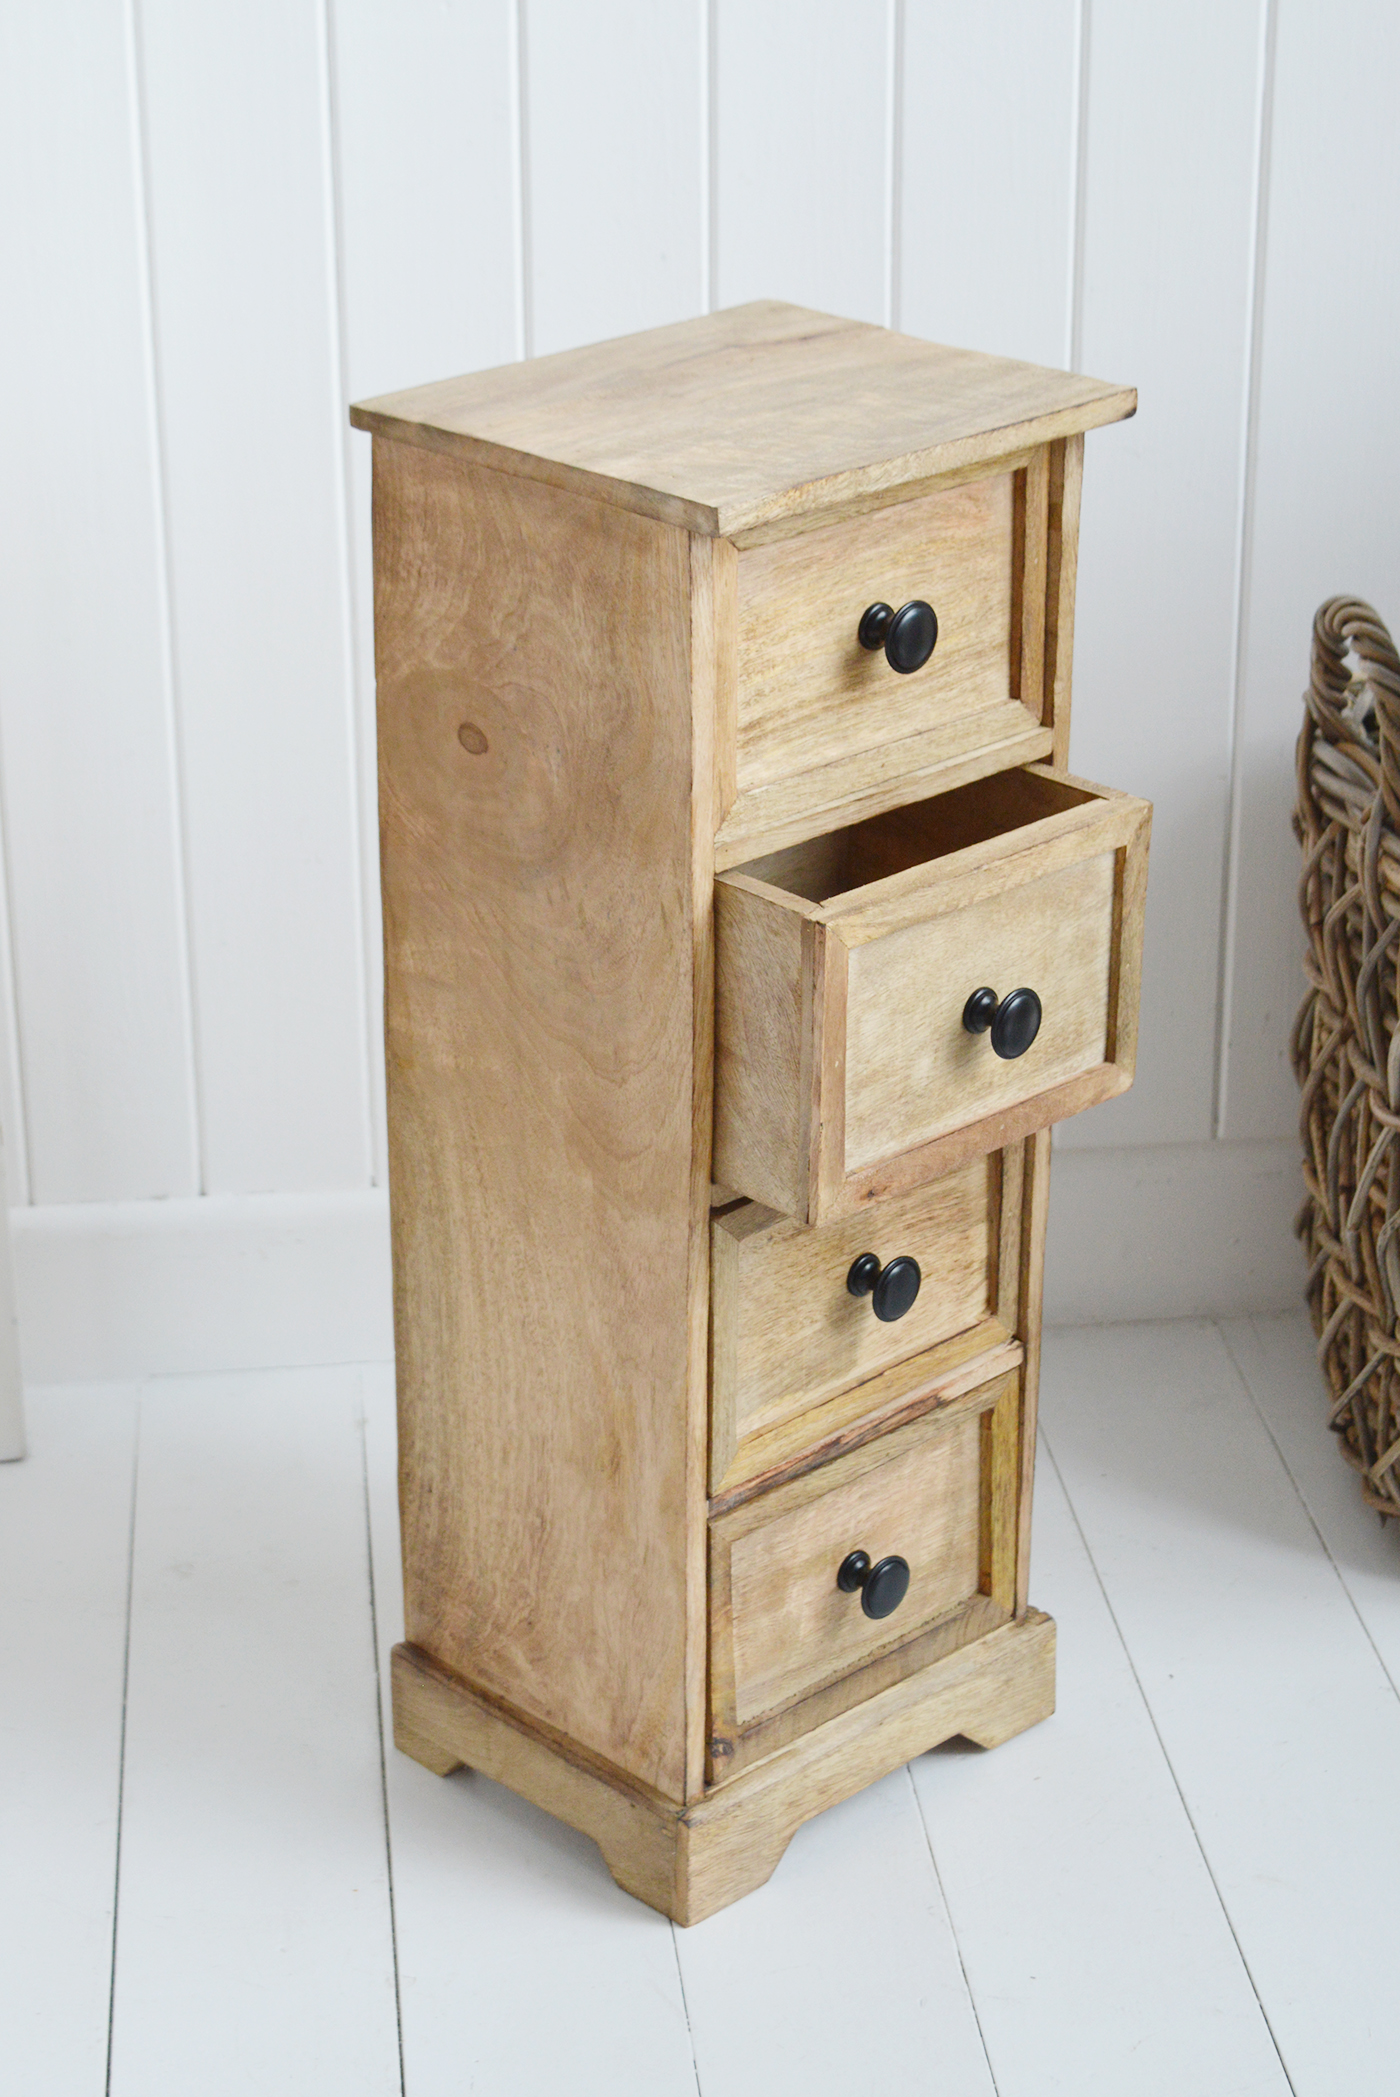 Dorset narrow bedside cabinet. A table with drawers that is 23 cm wide. Slim bedside tables in Mango wood